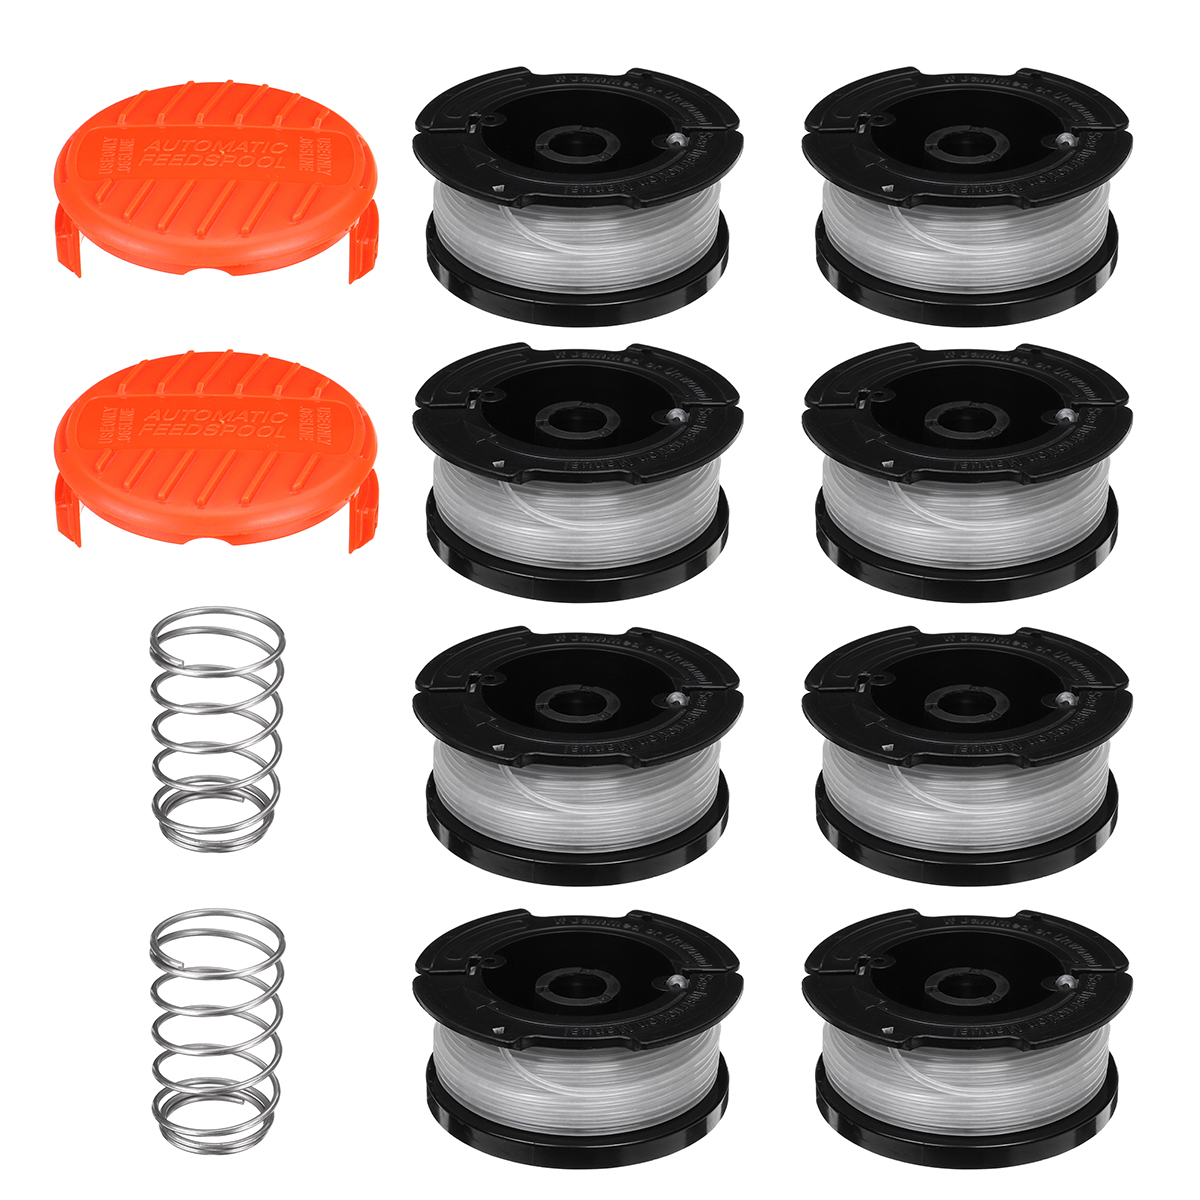 

8Pcs Weed Eater String Replacement Spool Line + 2Pcs Trimmer Cap For Black For Decker Lawnmower